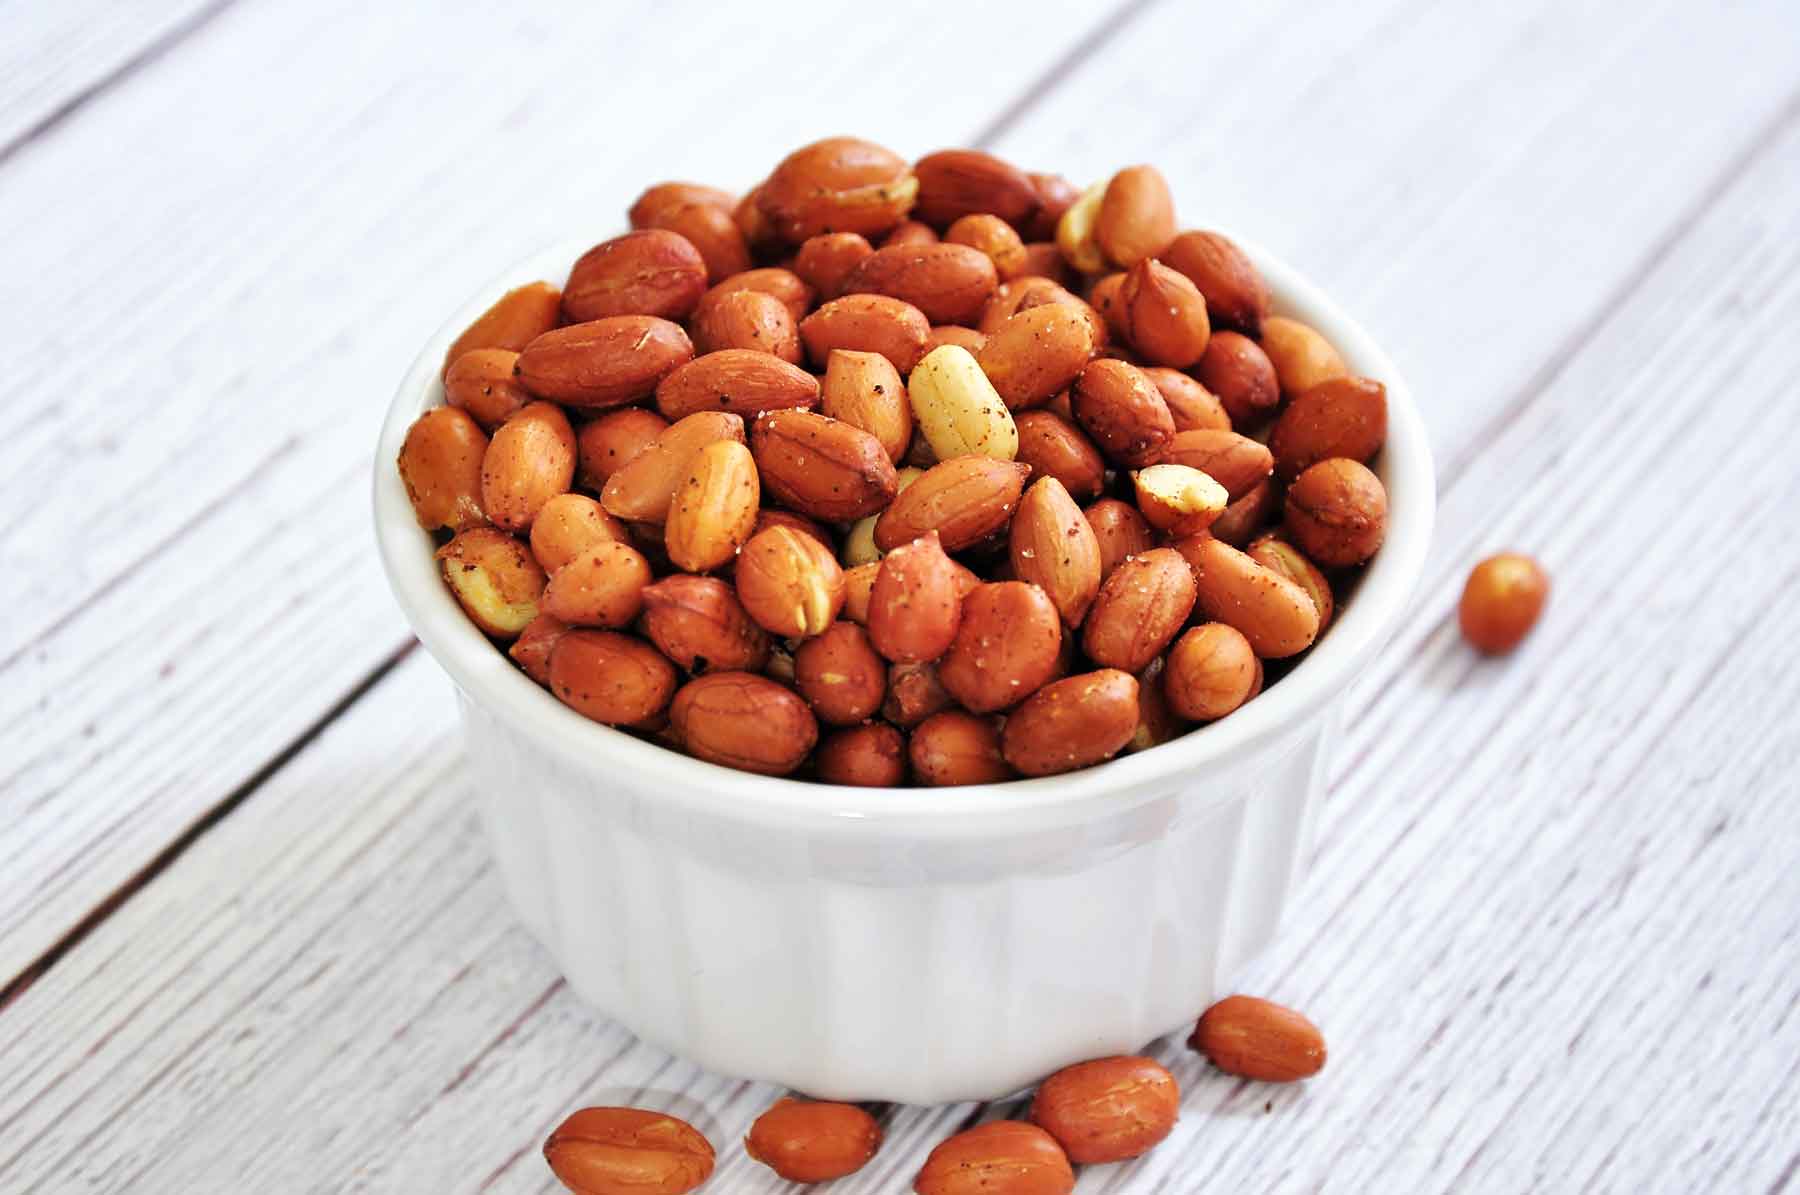 Roasted peanuts in a bowl.